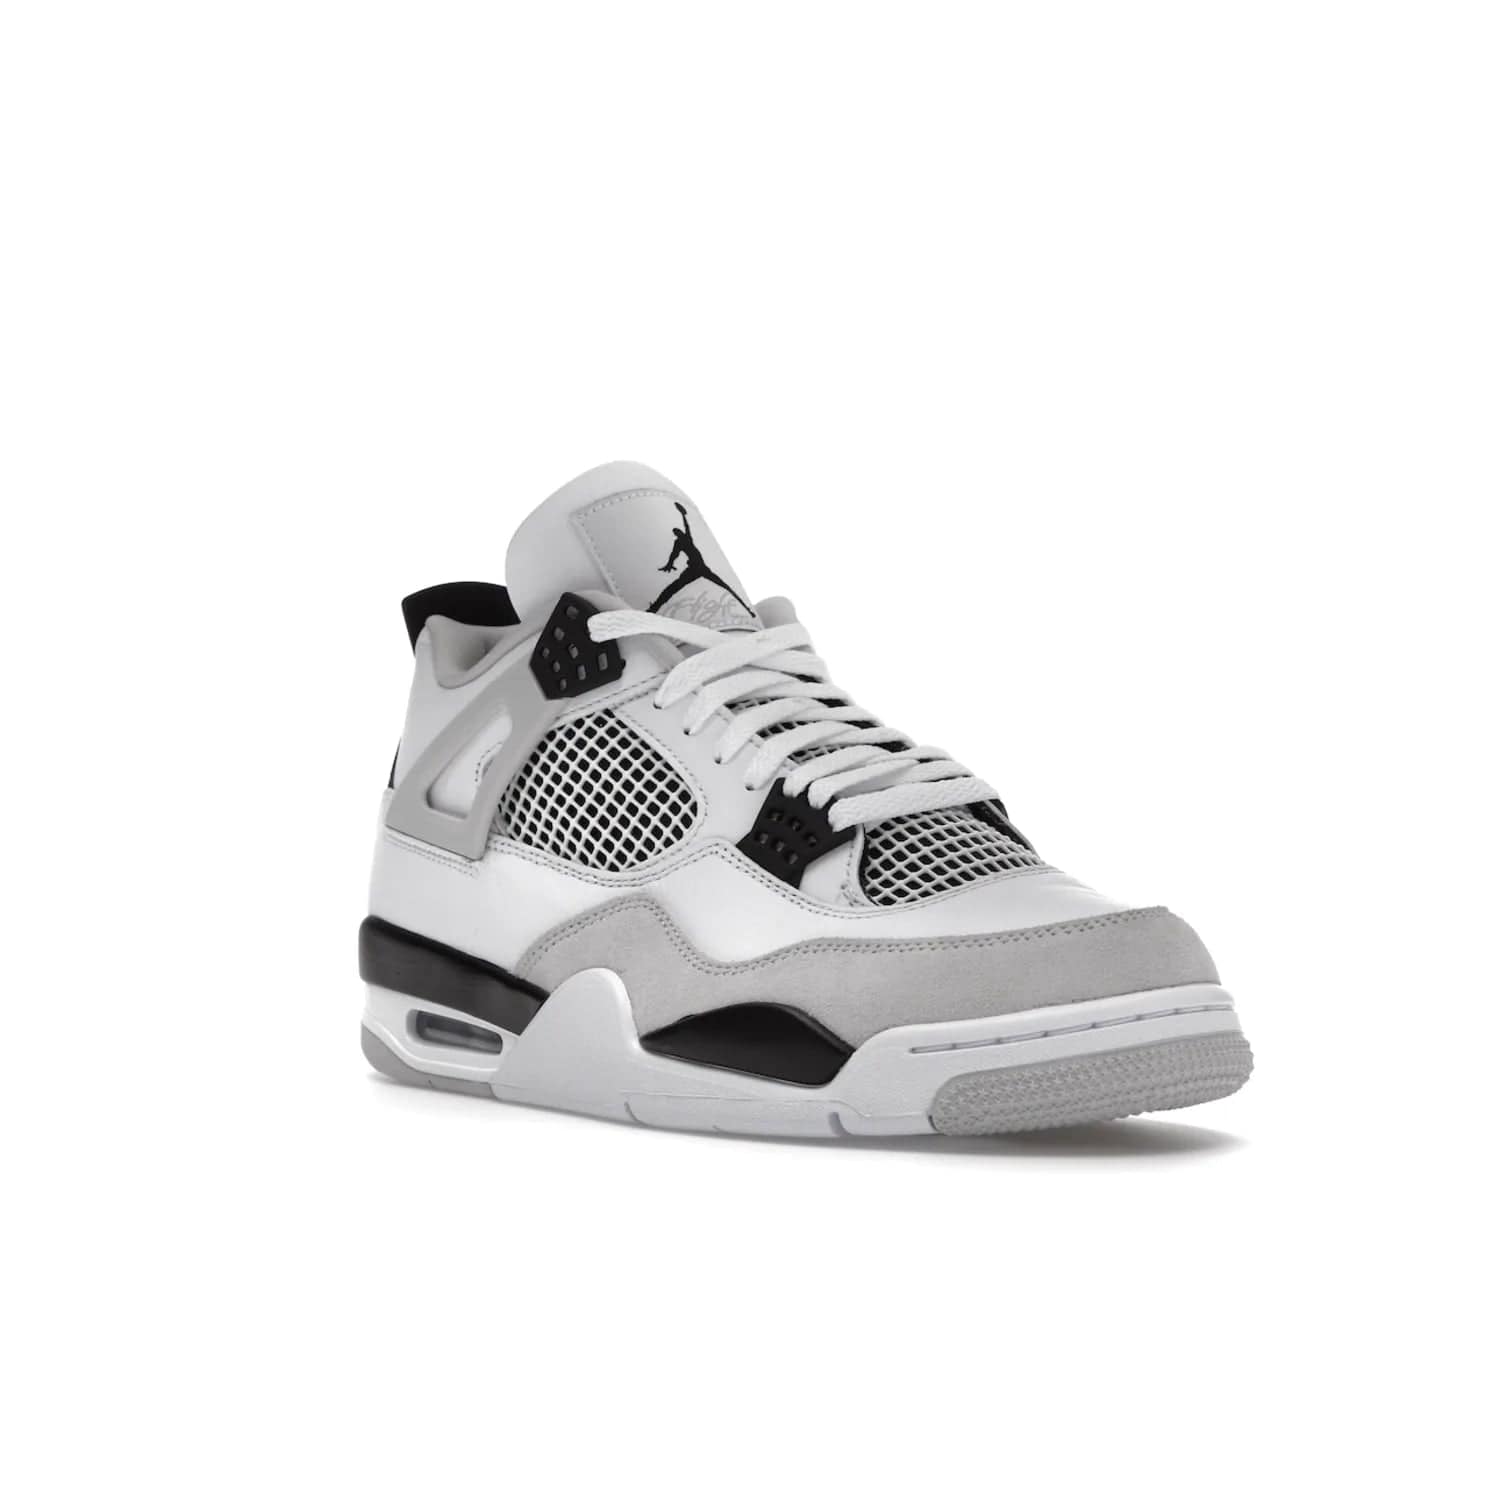 Jordan 4 Retro Military Black - Image 6 - Only at www.BallersClubKickz.com - Updated Air Jordan 4 style with a white/black/light grey sole and visible Air unit. Released in May 2022, offering timeless classic style and comfort.